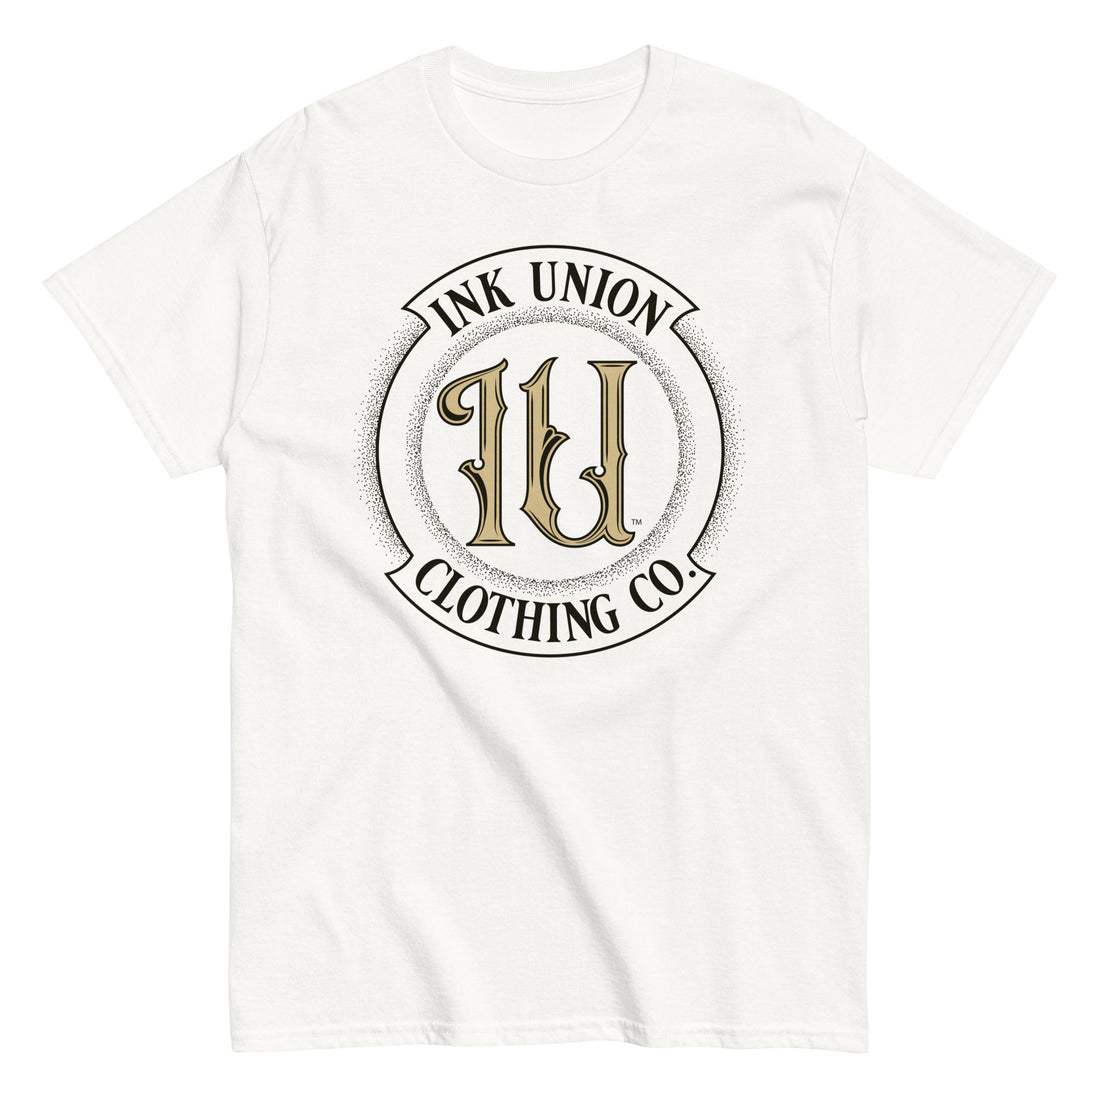 A white t-shirt with the Ink Union Clothing Co Badge logo in black and gold centered on the front of the shirt.